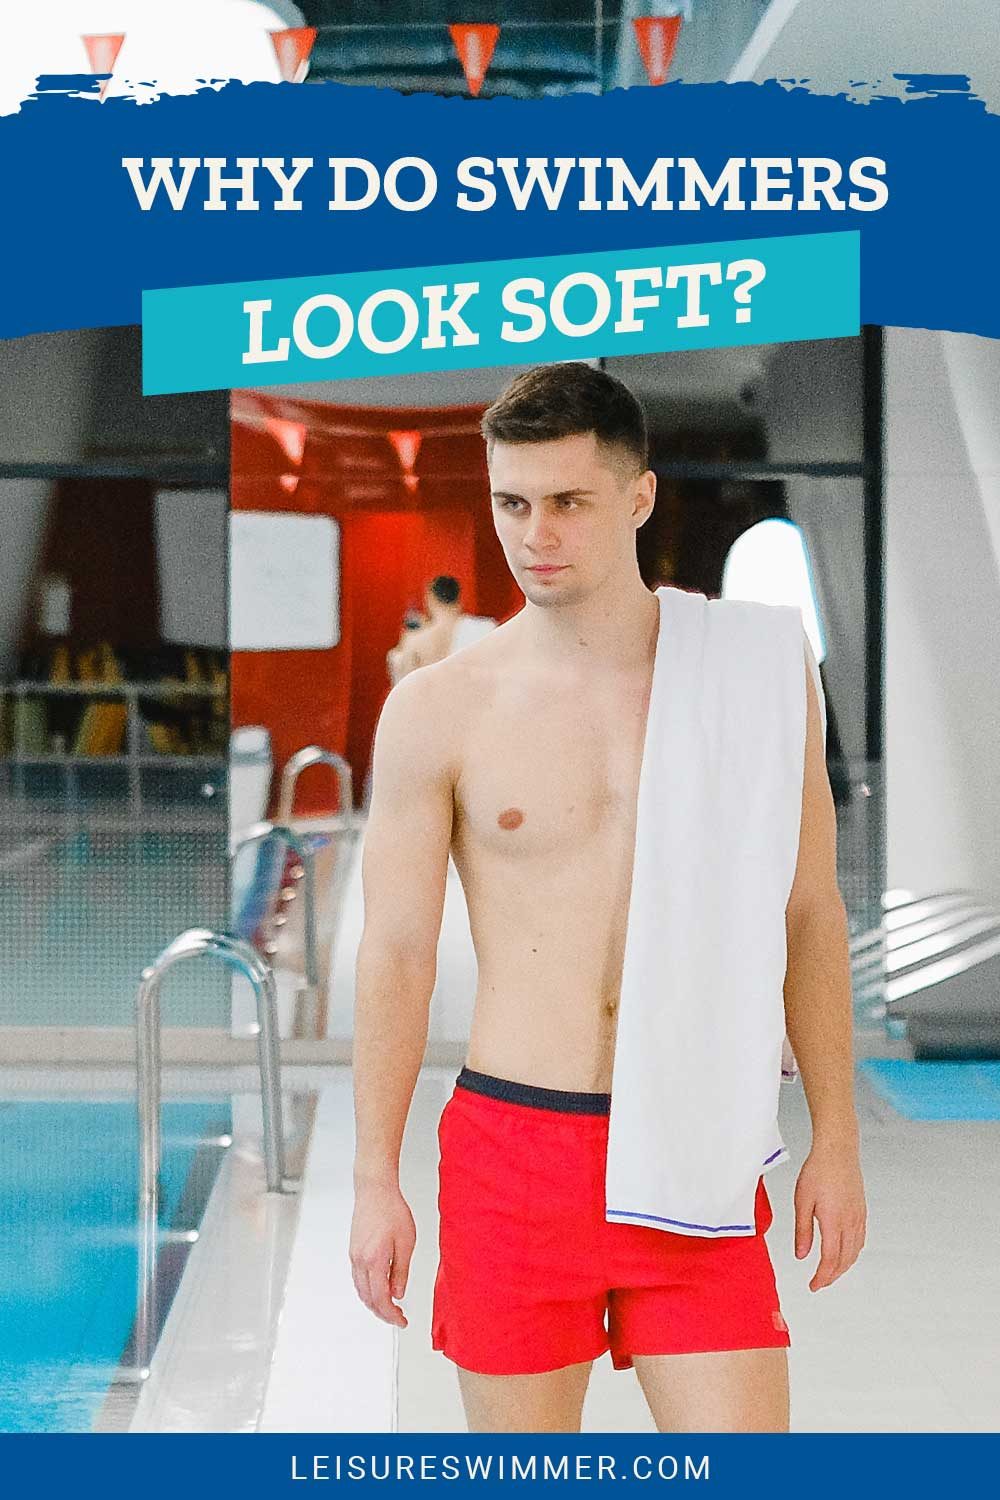 Man wearing red shorts near a pool - Why Do Swimmers Look Soft?